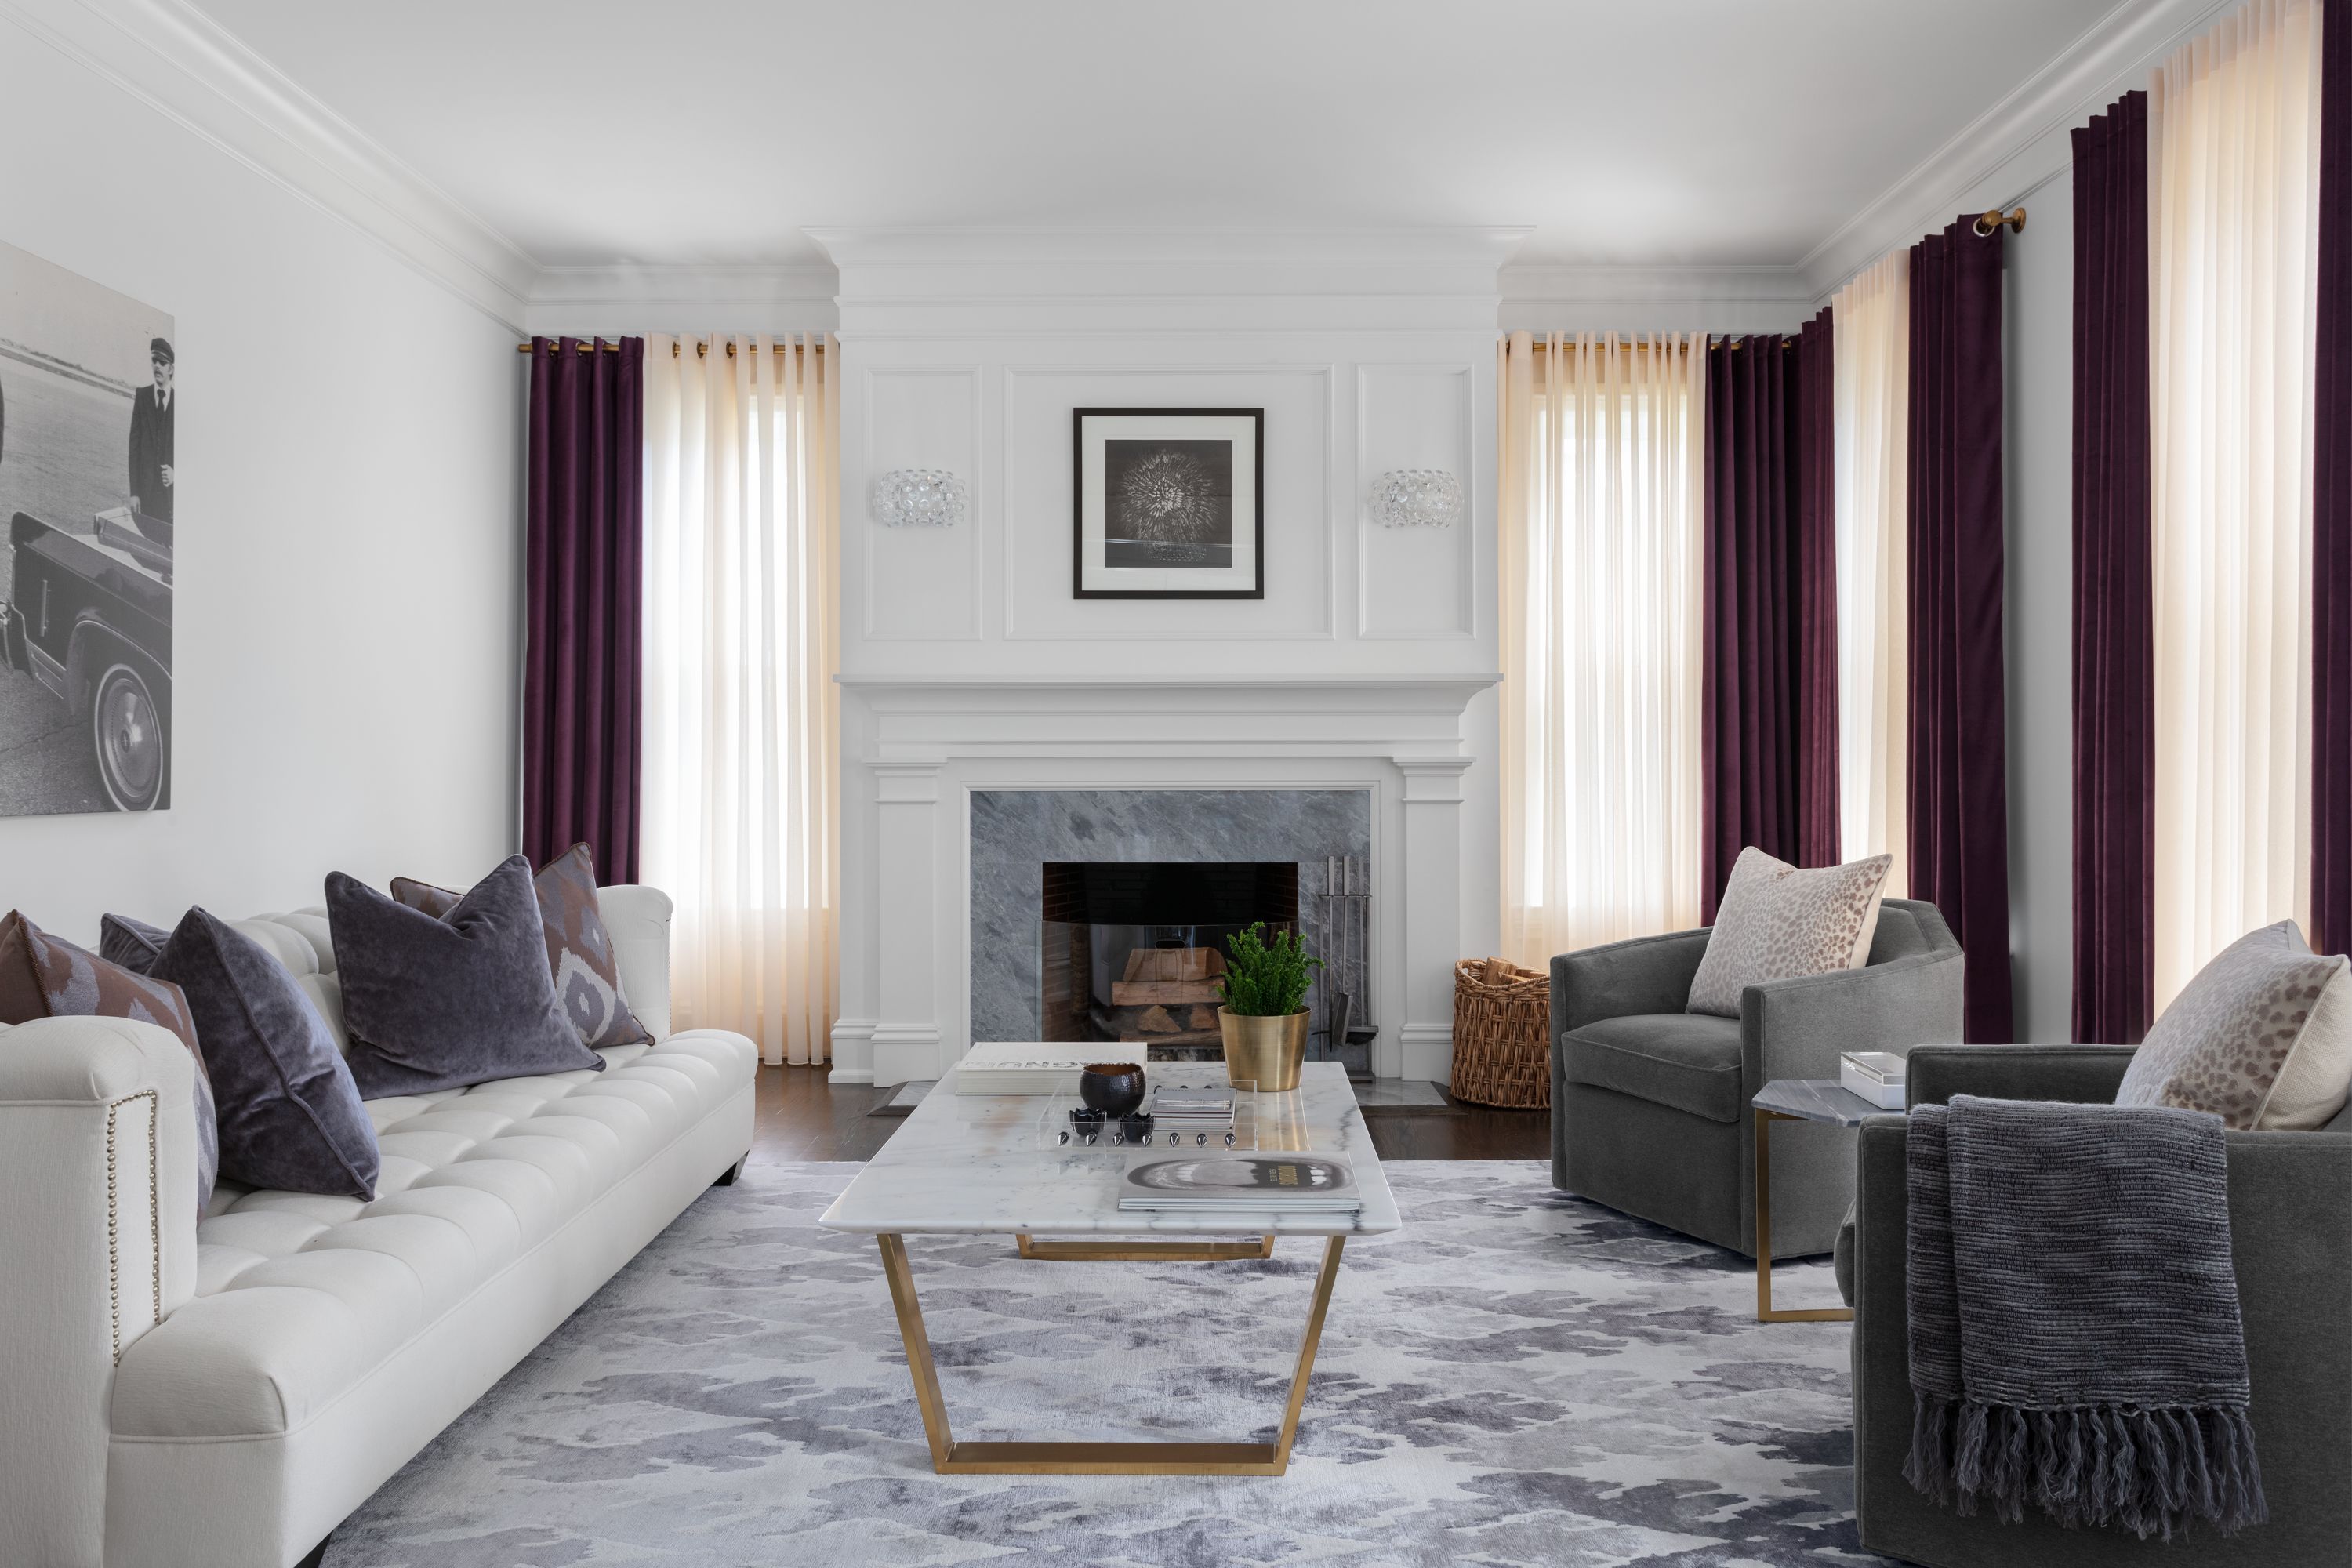 A modern living room with large windows features sheer white drapery paired with purple velvet drapes